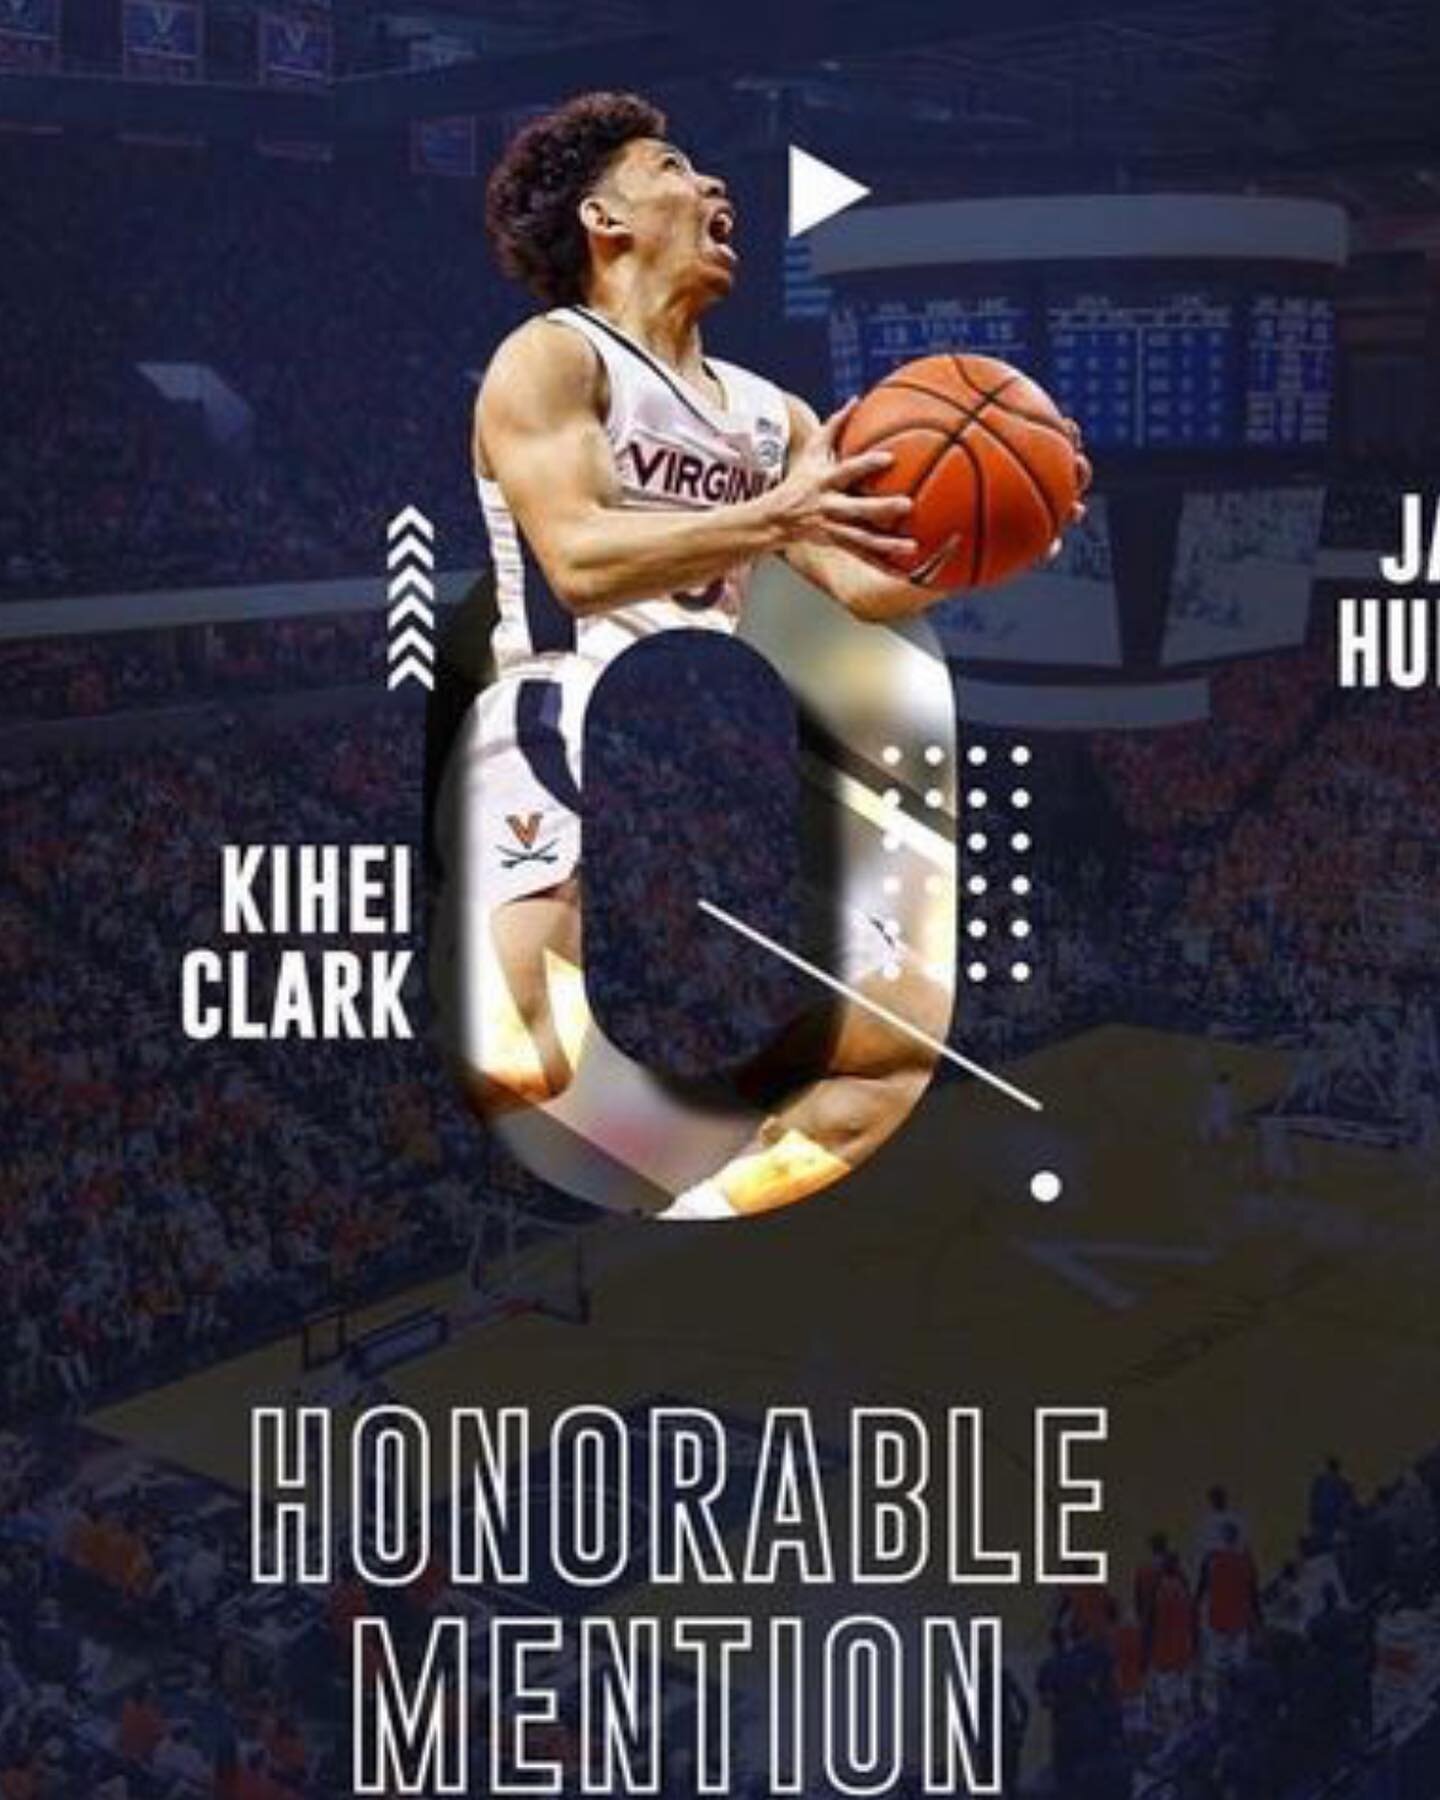 Congrats to soldier alum @kihei.clark on earning all @accsports conference!!!!!
#soldierbasketball#Thefraternity#Salute